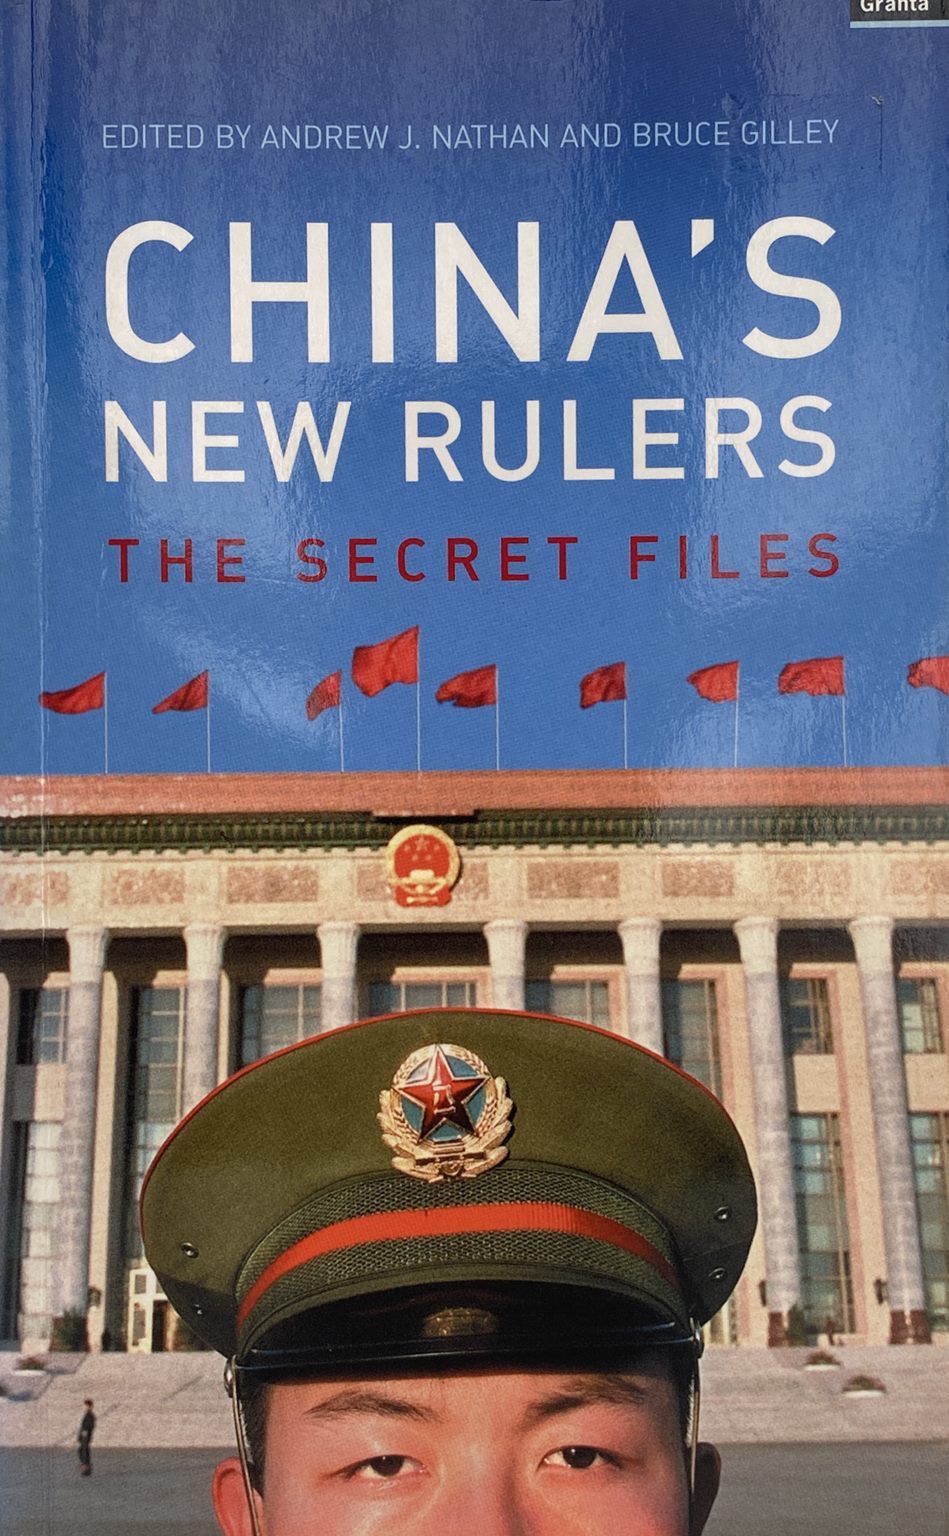 CHINA'S NEW RULERS: The Secret Files